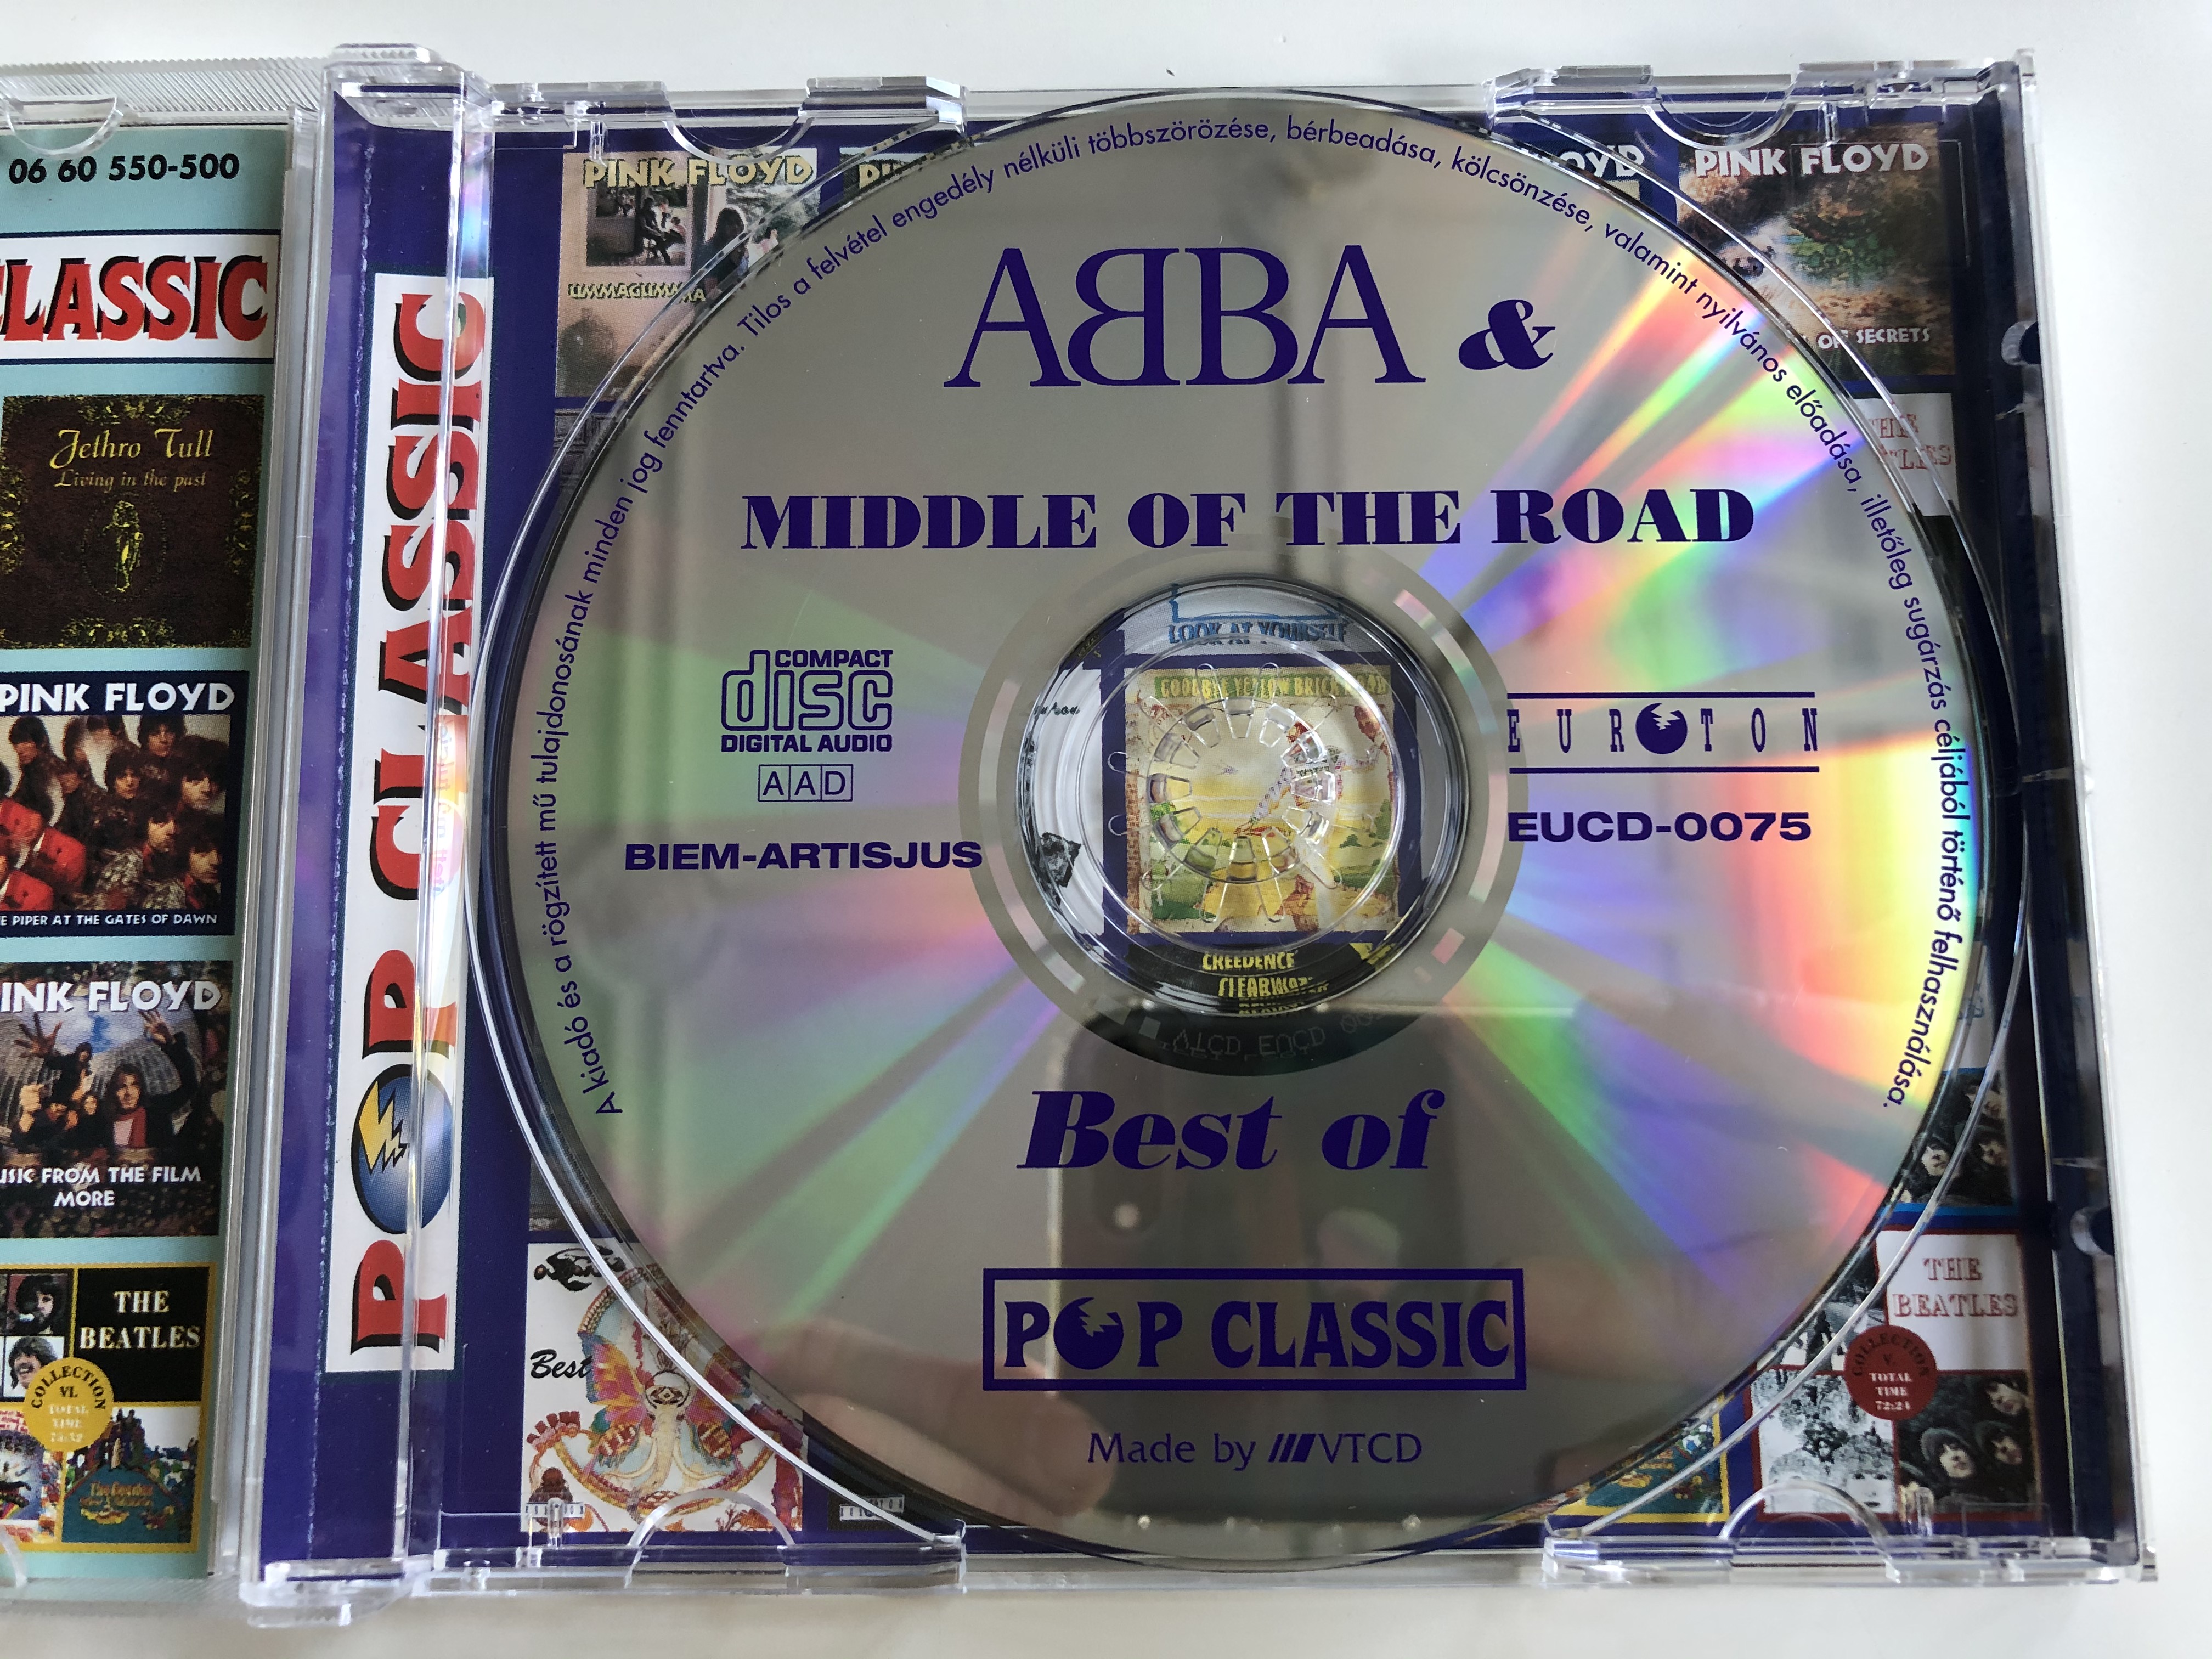 ABBA & Middle Of The Road ‎– Best Of / Pop Classic / Euroton ‎Audio CD /  EUCD-0075 - bibleinmylanguage